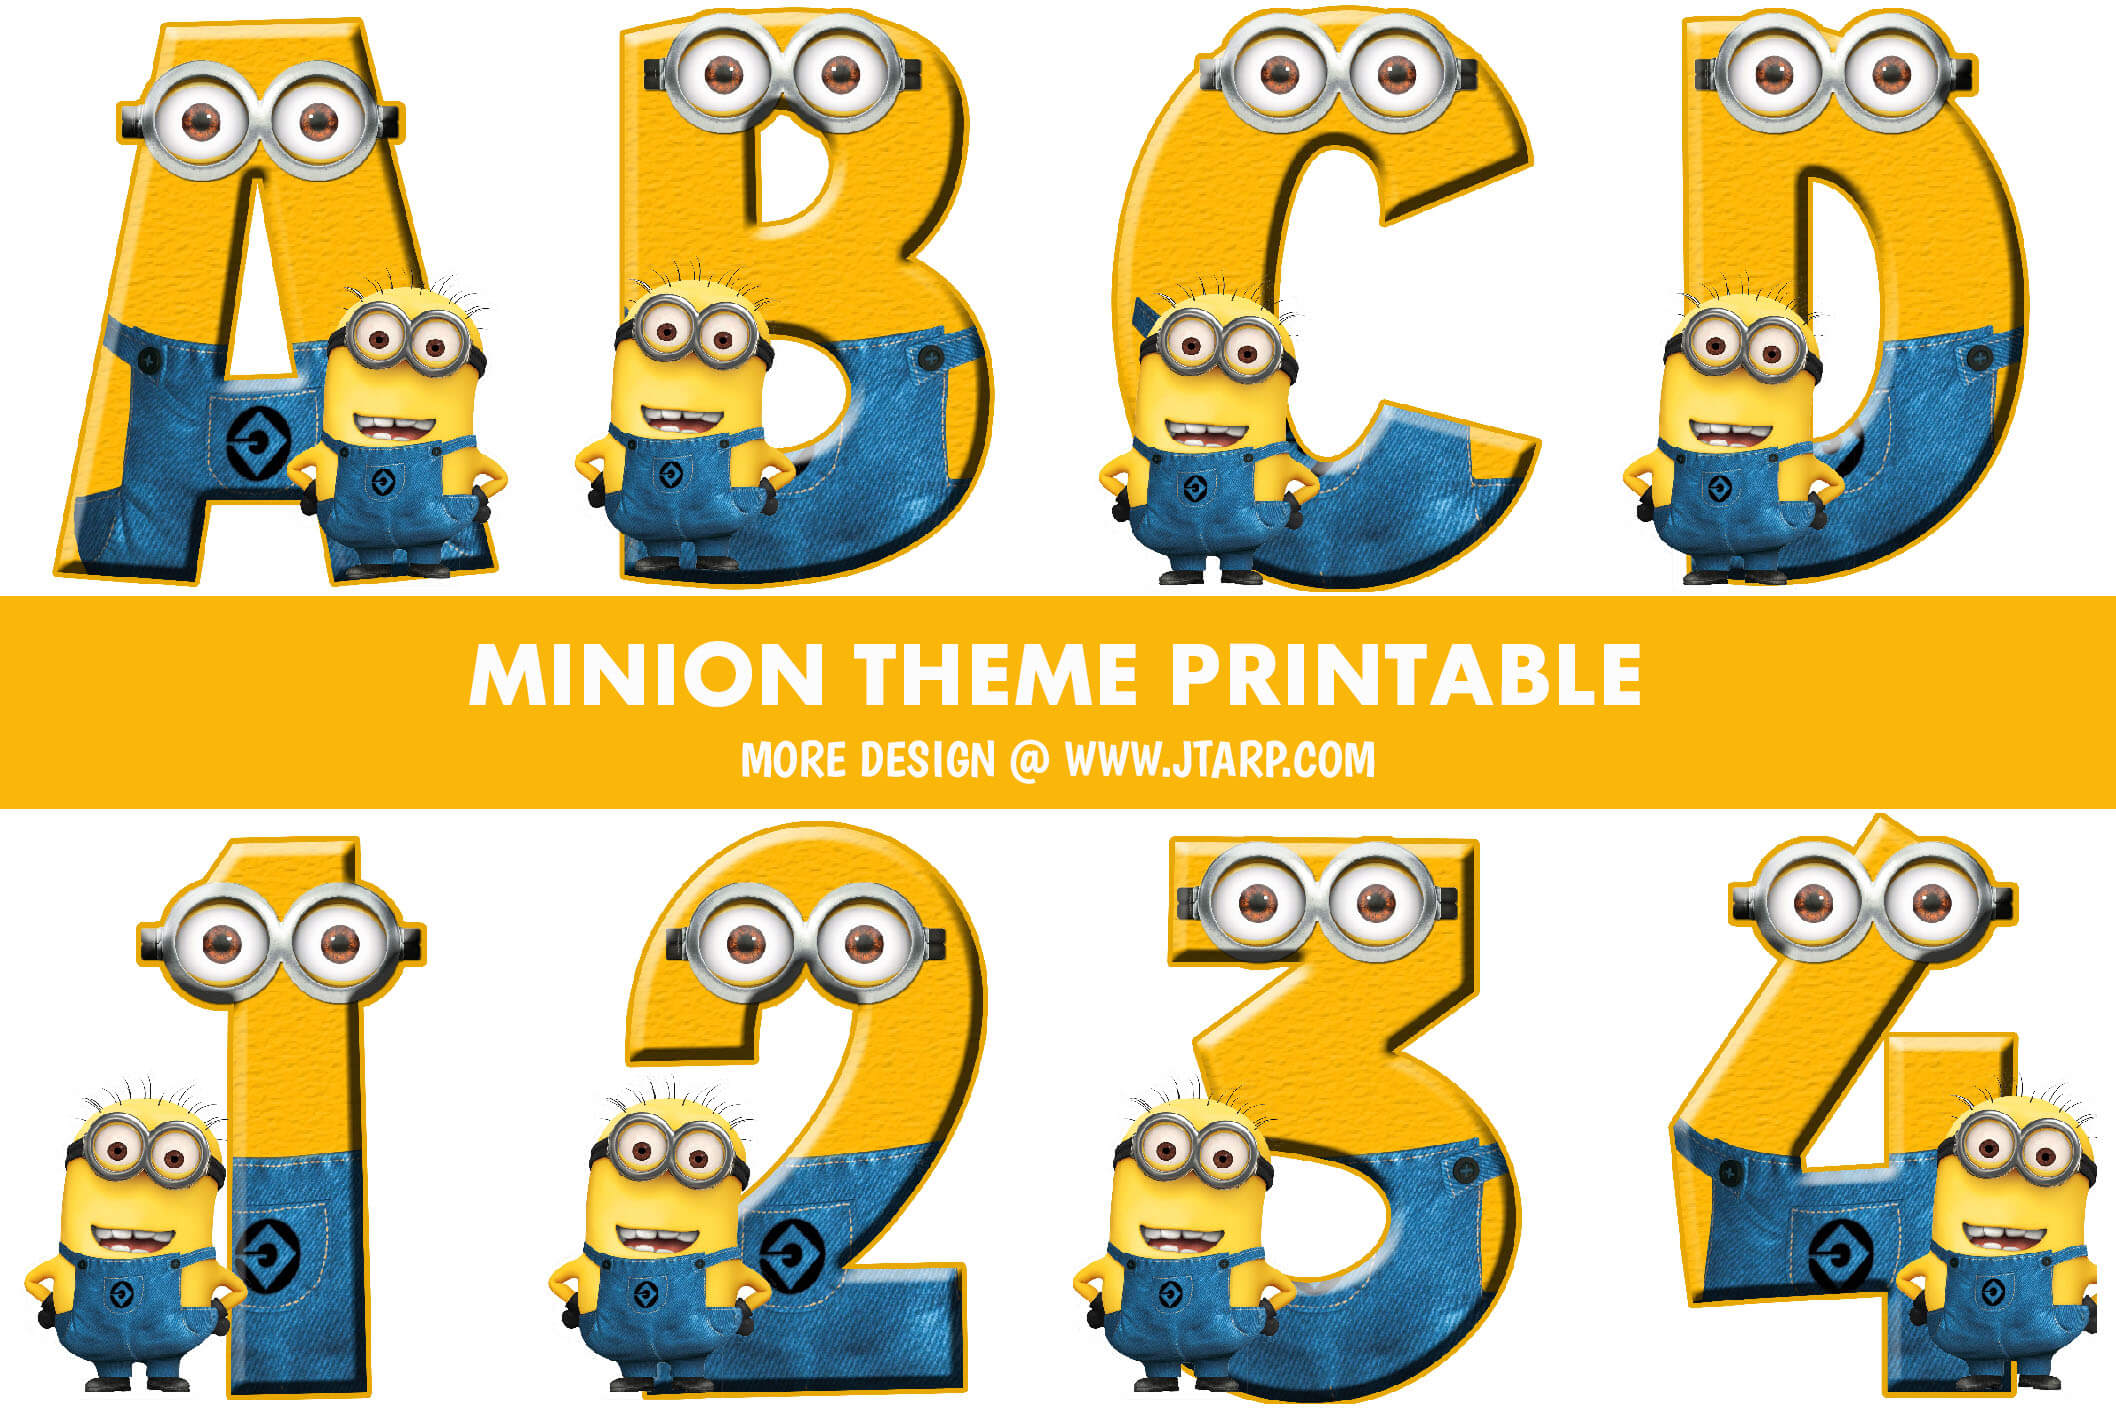 DESPICABLE ME MINIONS CUPCAKE TOPPERS PARTY MINION BIRTHDAY PARTY CUPCAKES  | eBay